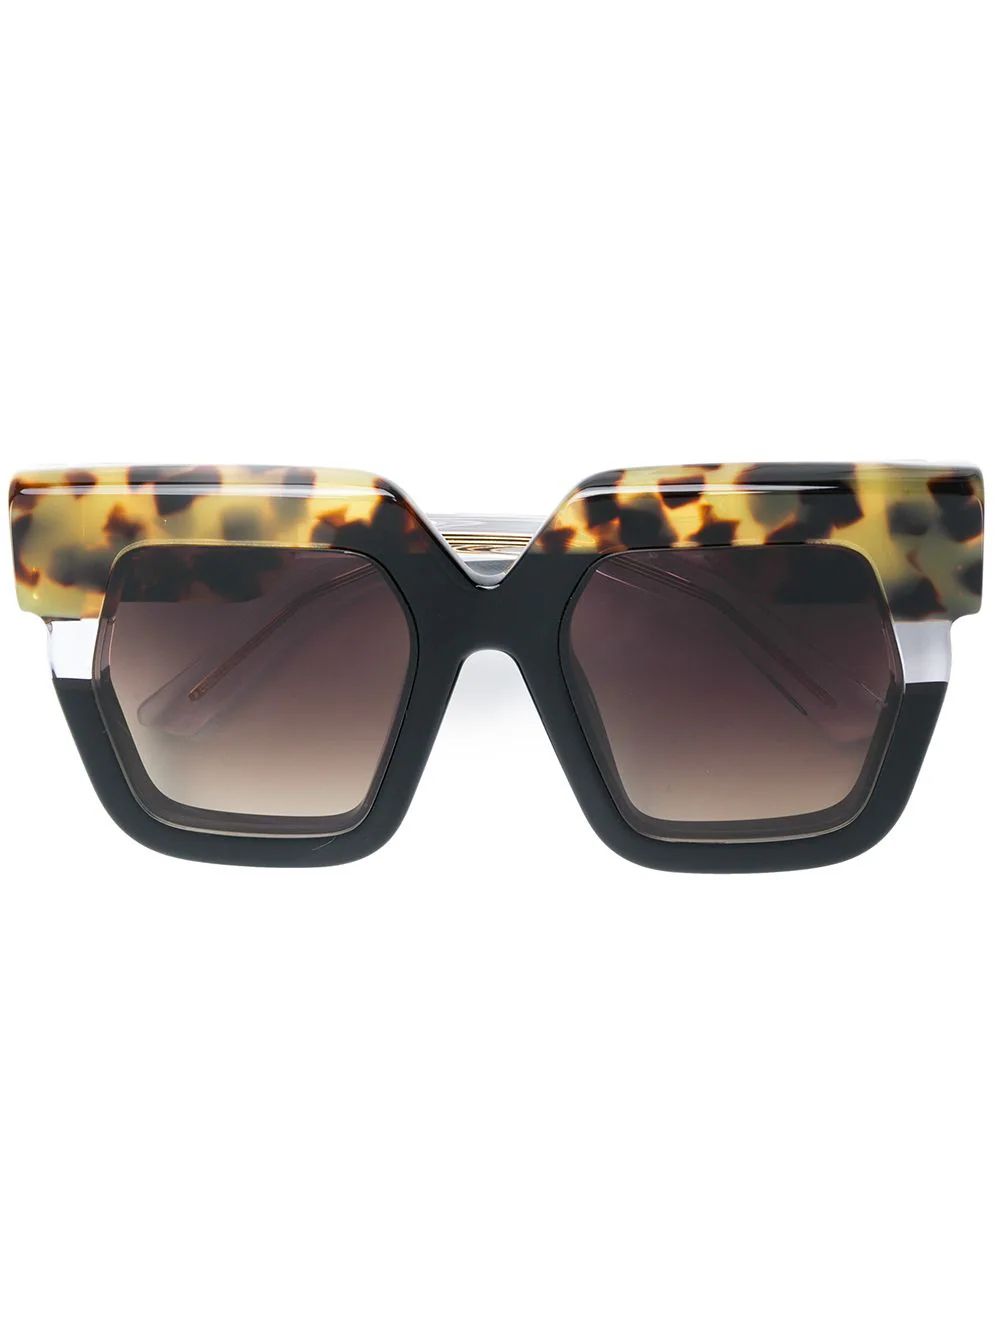 Jacques Marie Mage Lipton oversize sunglasses - Brown | FarFetch Global